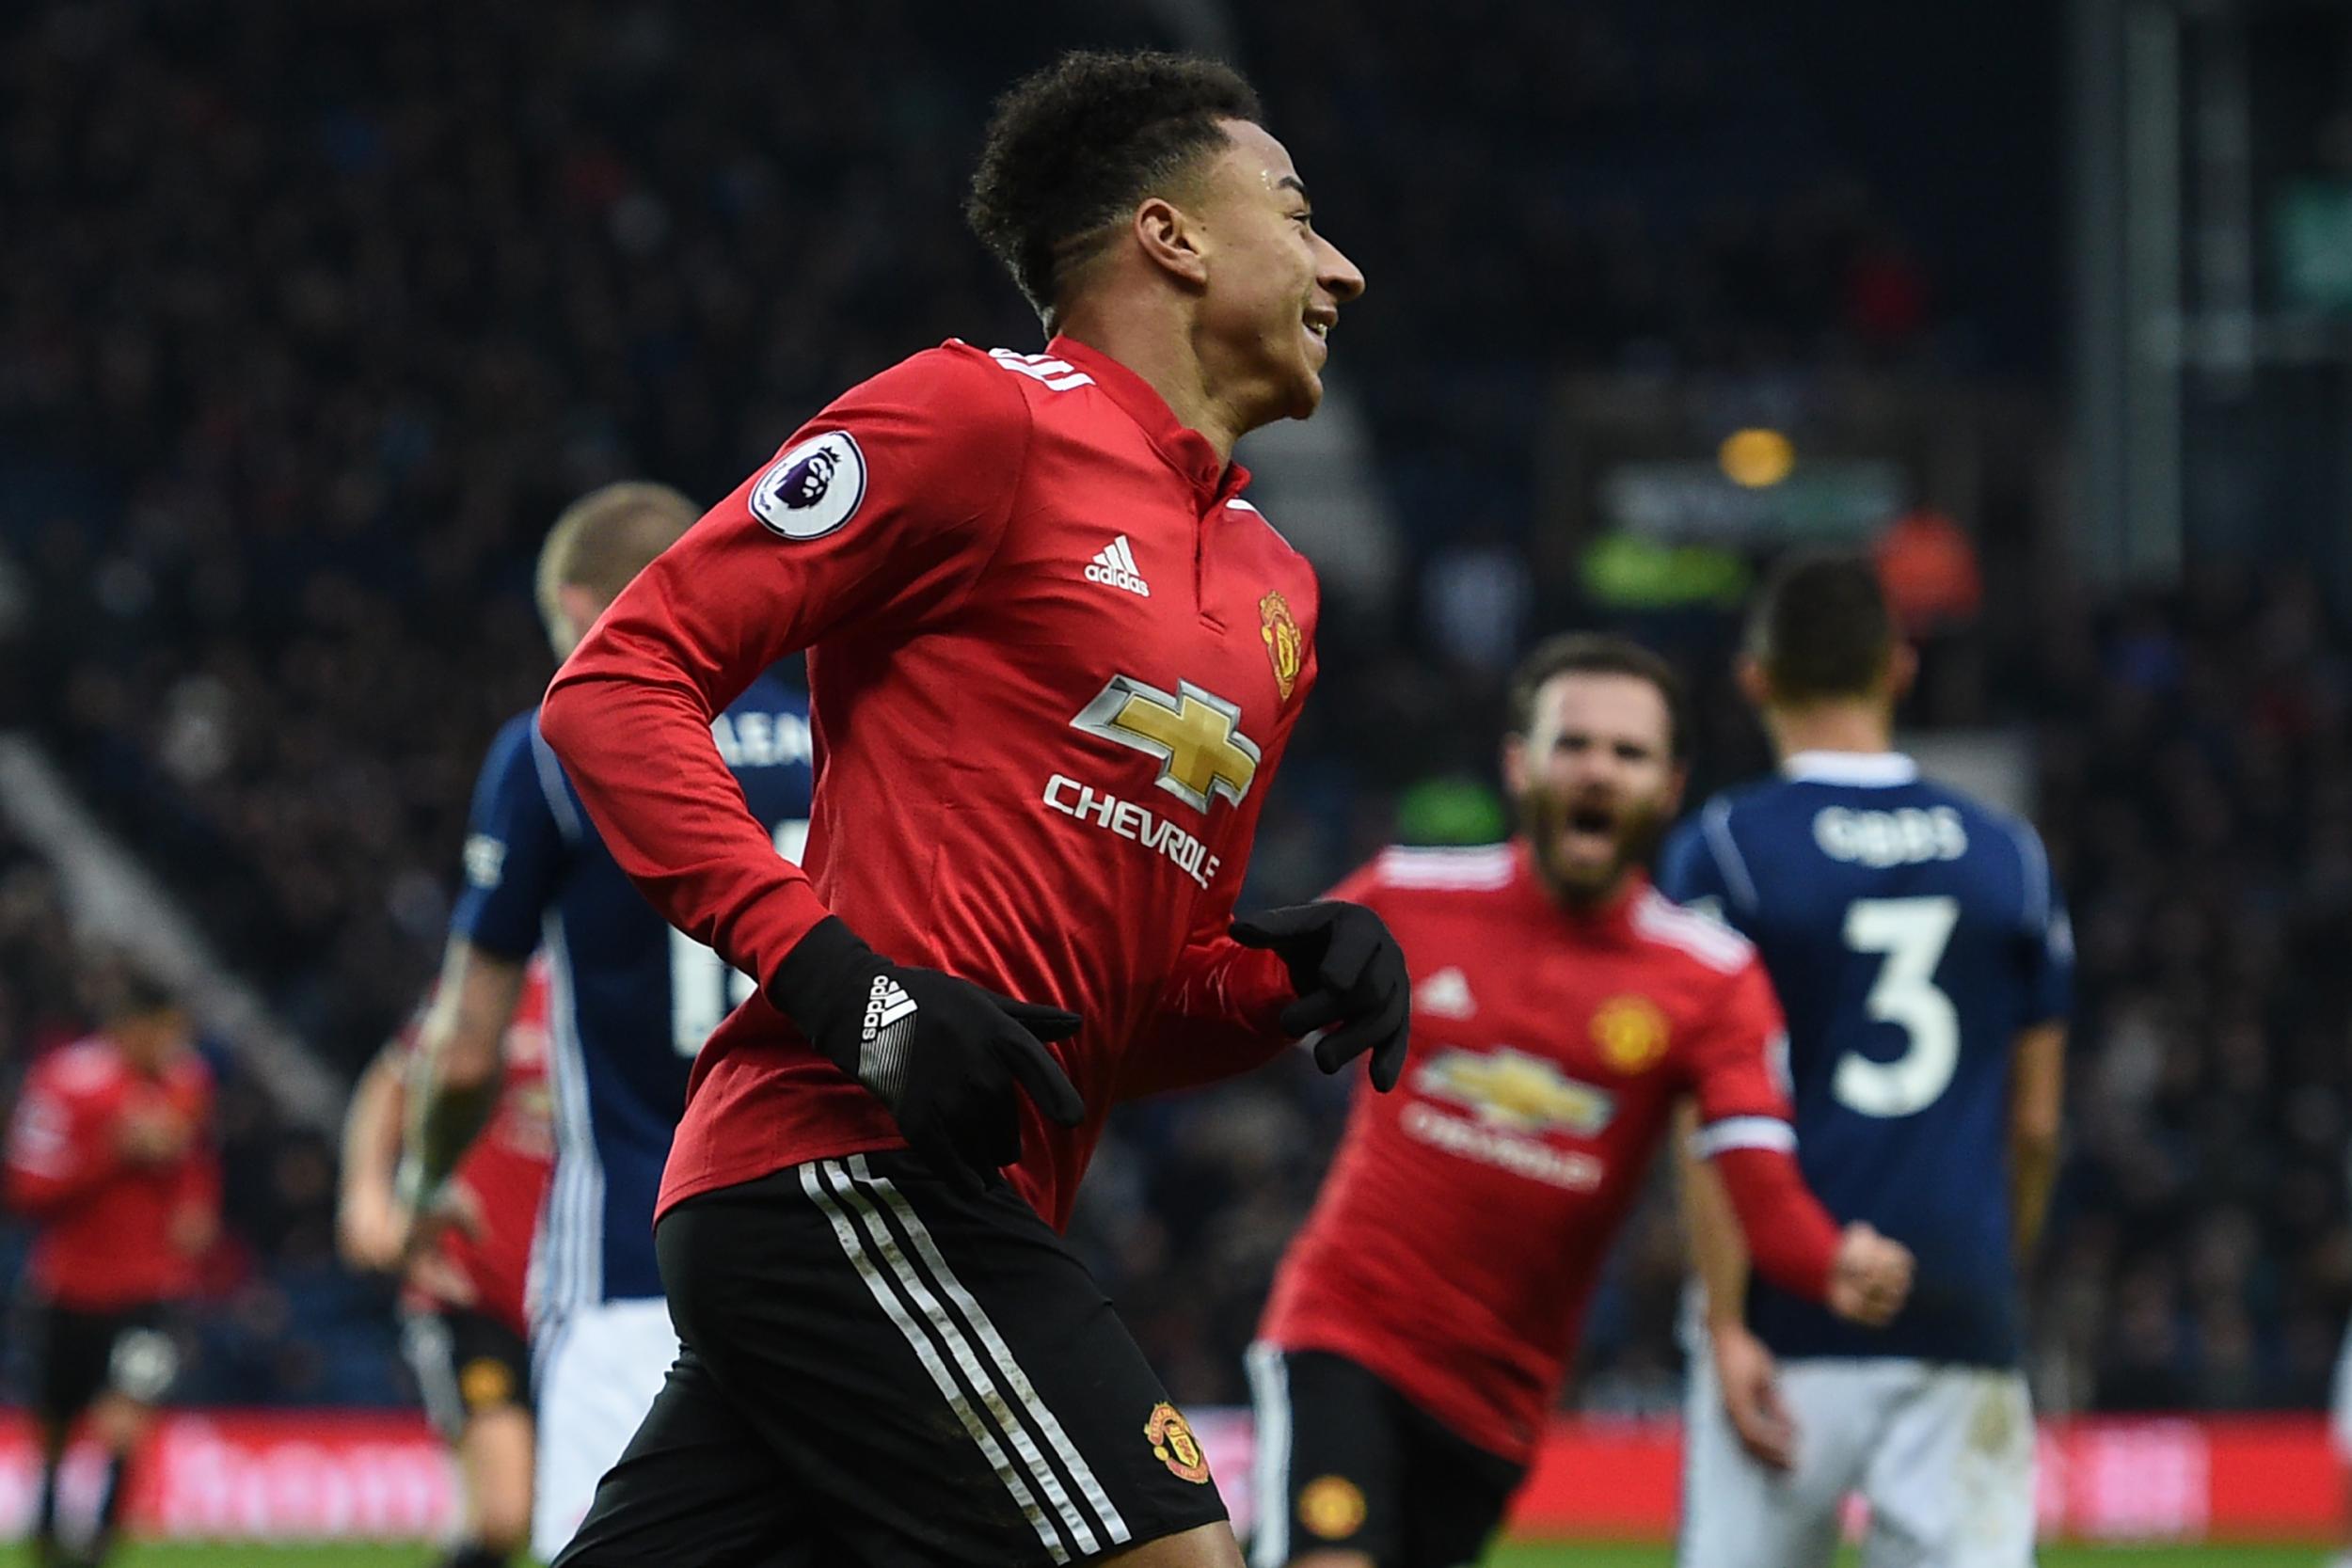 Jesse Lingard has become an integral part of United's team